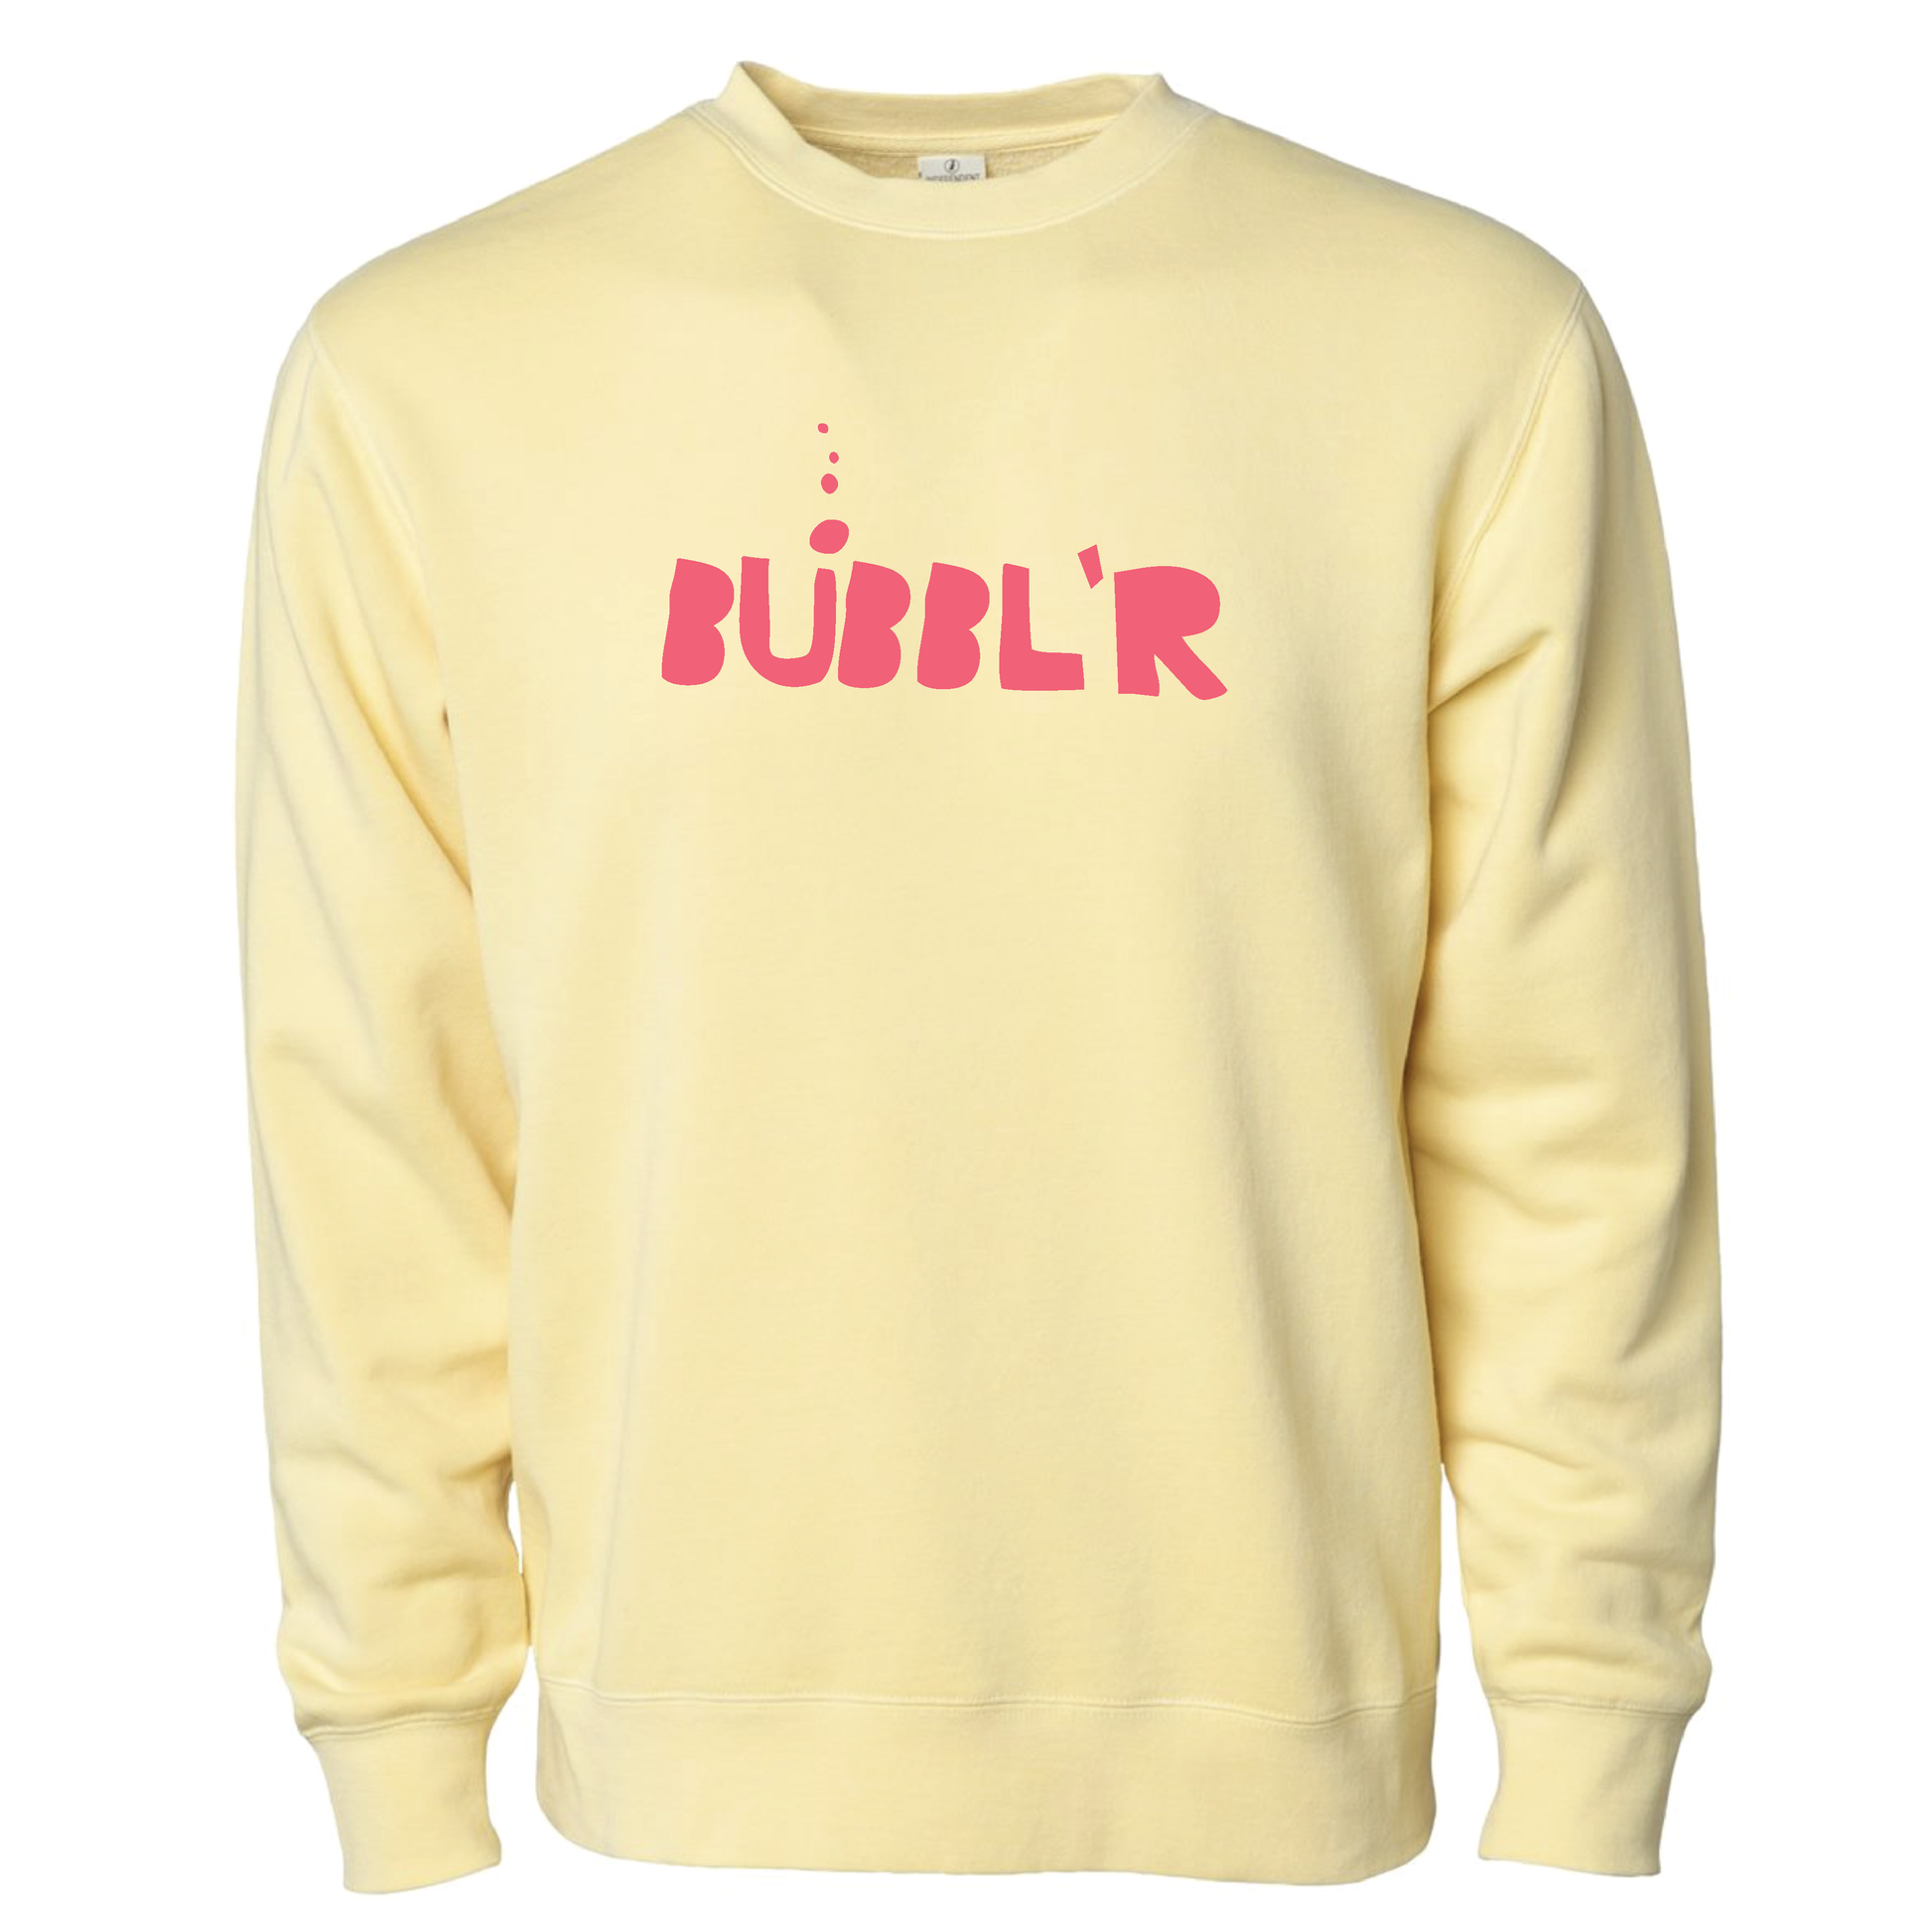 yellow sweater with pink bubbl'r logo